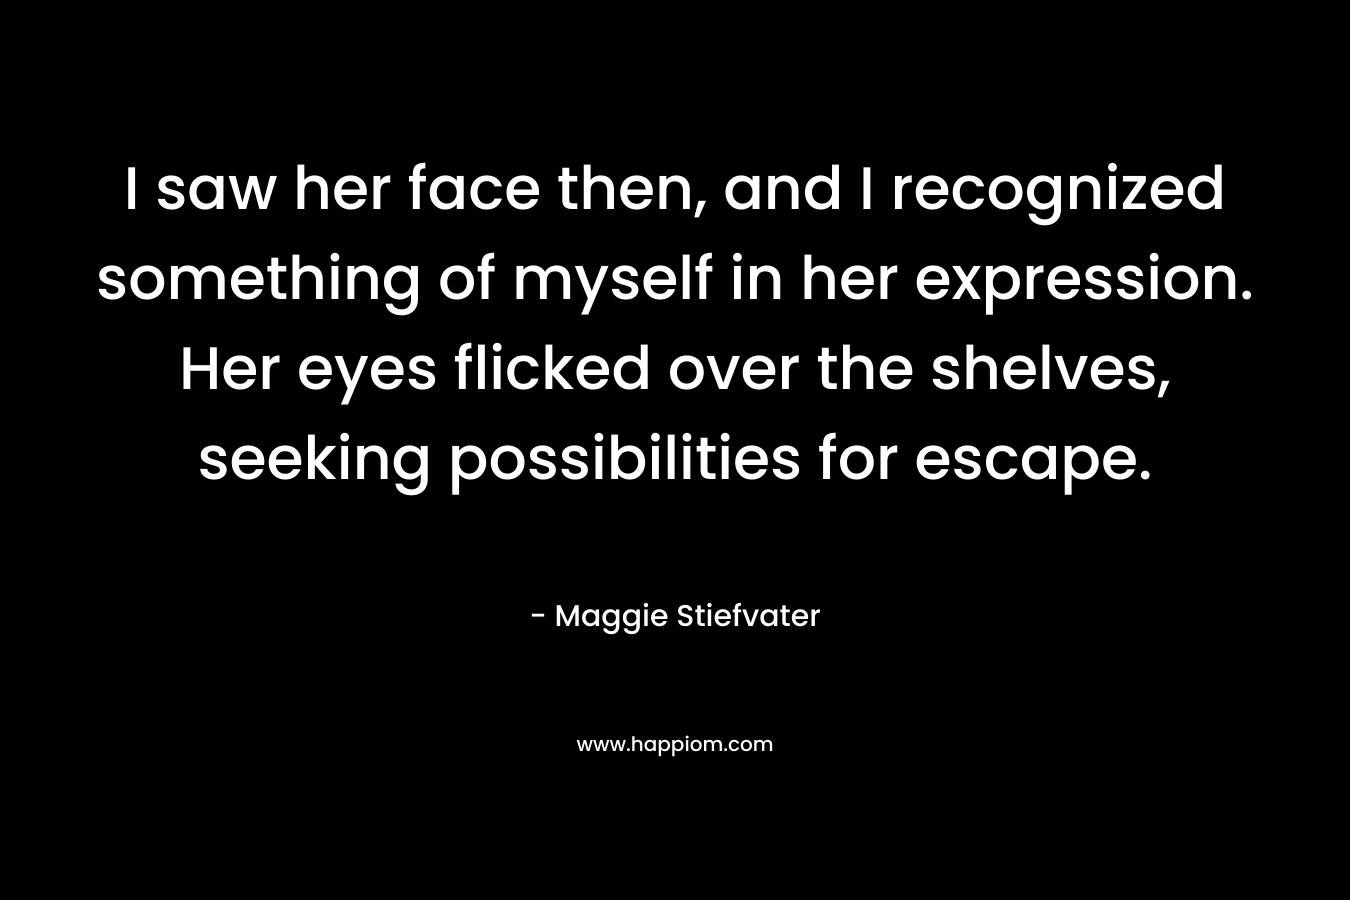 I saw her face then, and I recognized something of myself in her expression. Her eyes flicked over the shelves, seeking possibilities for escape. – Maggie Stiefvater